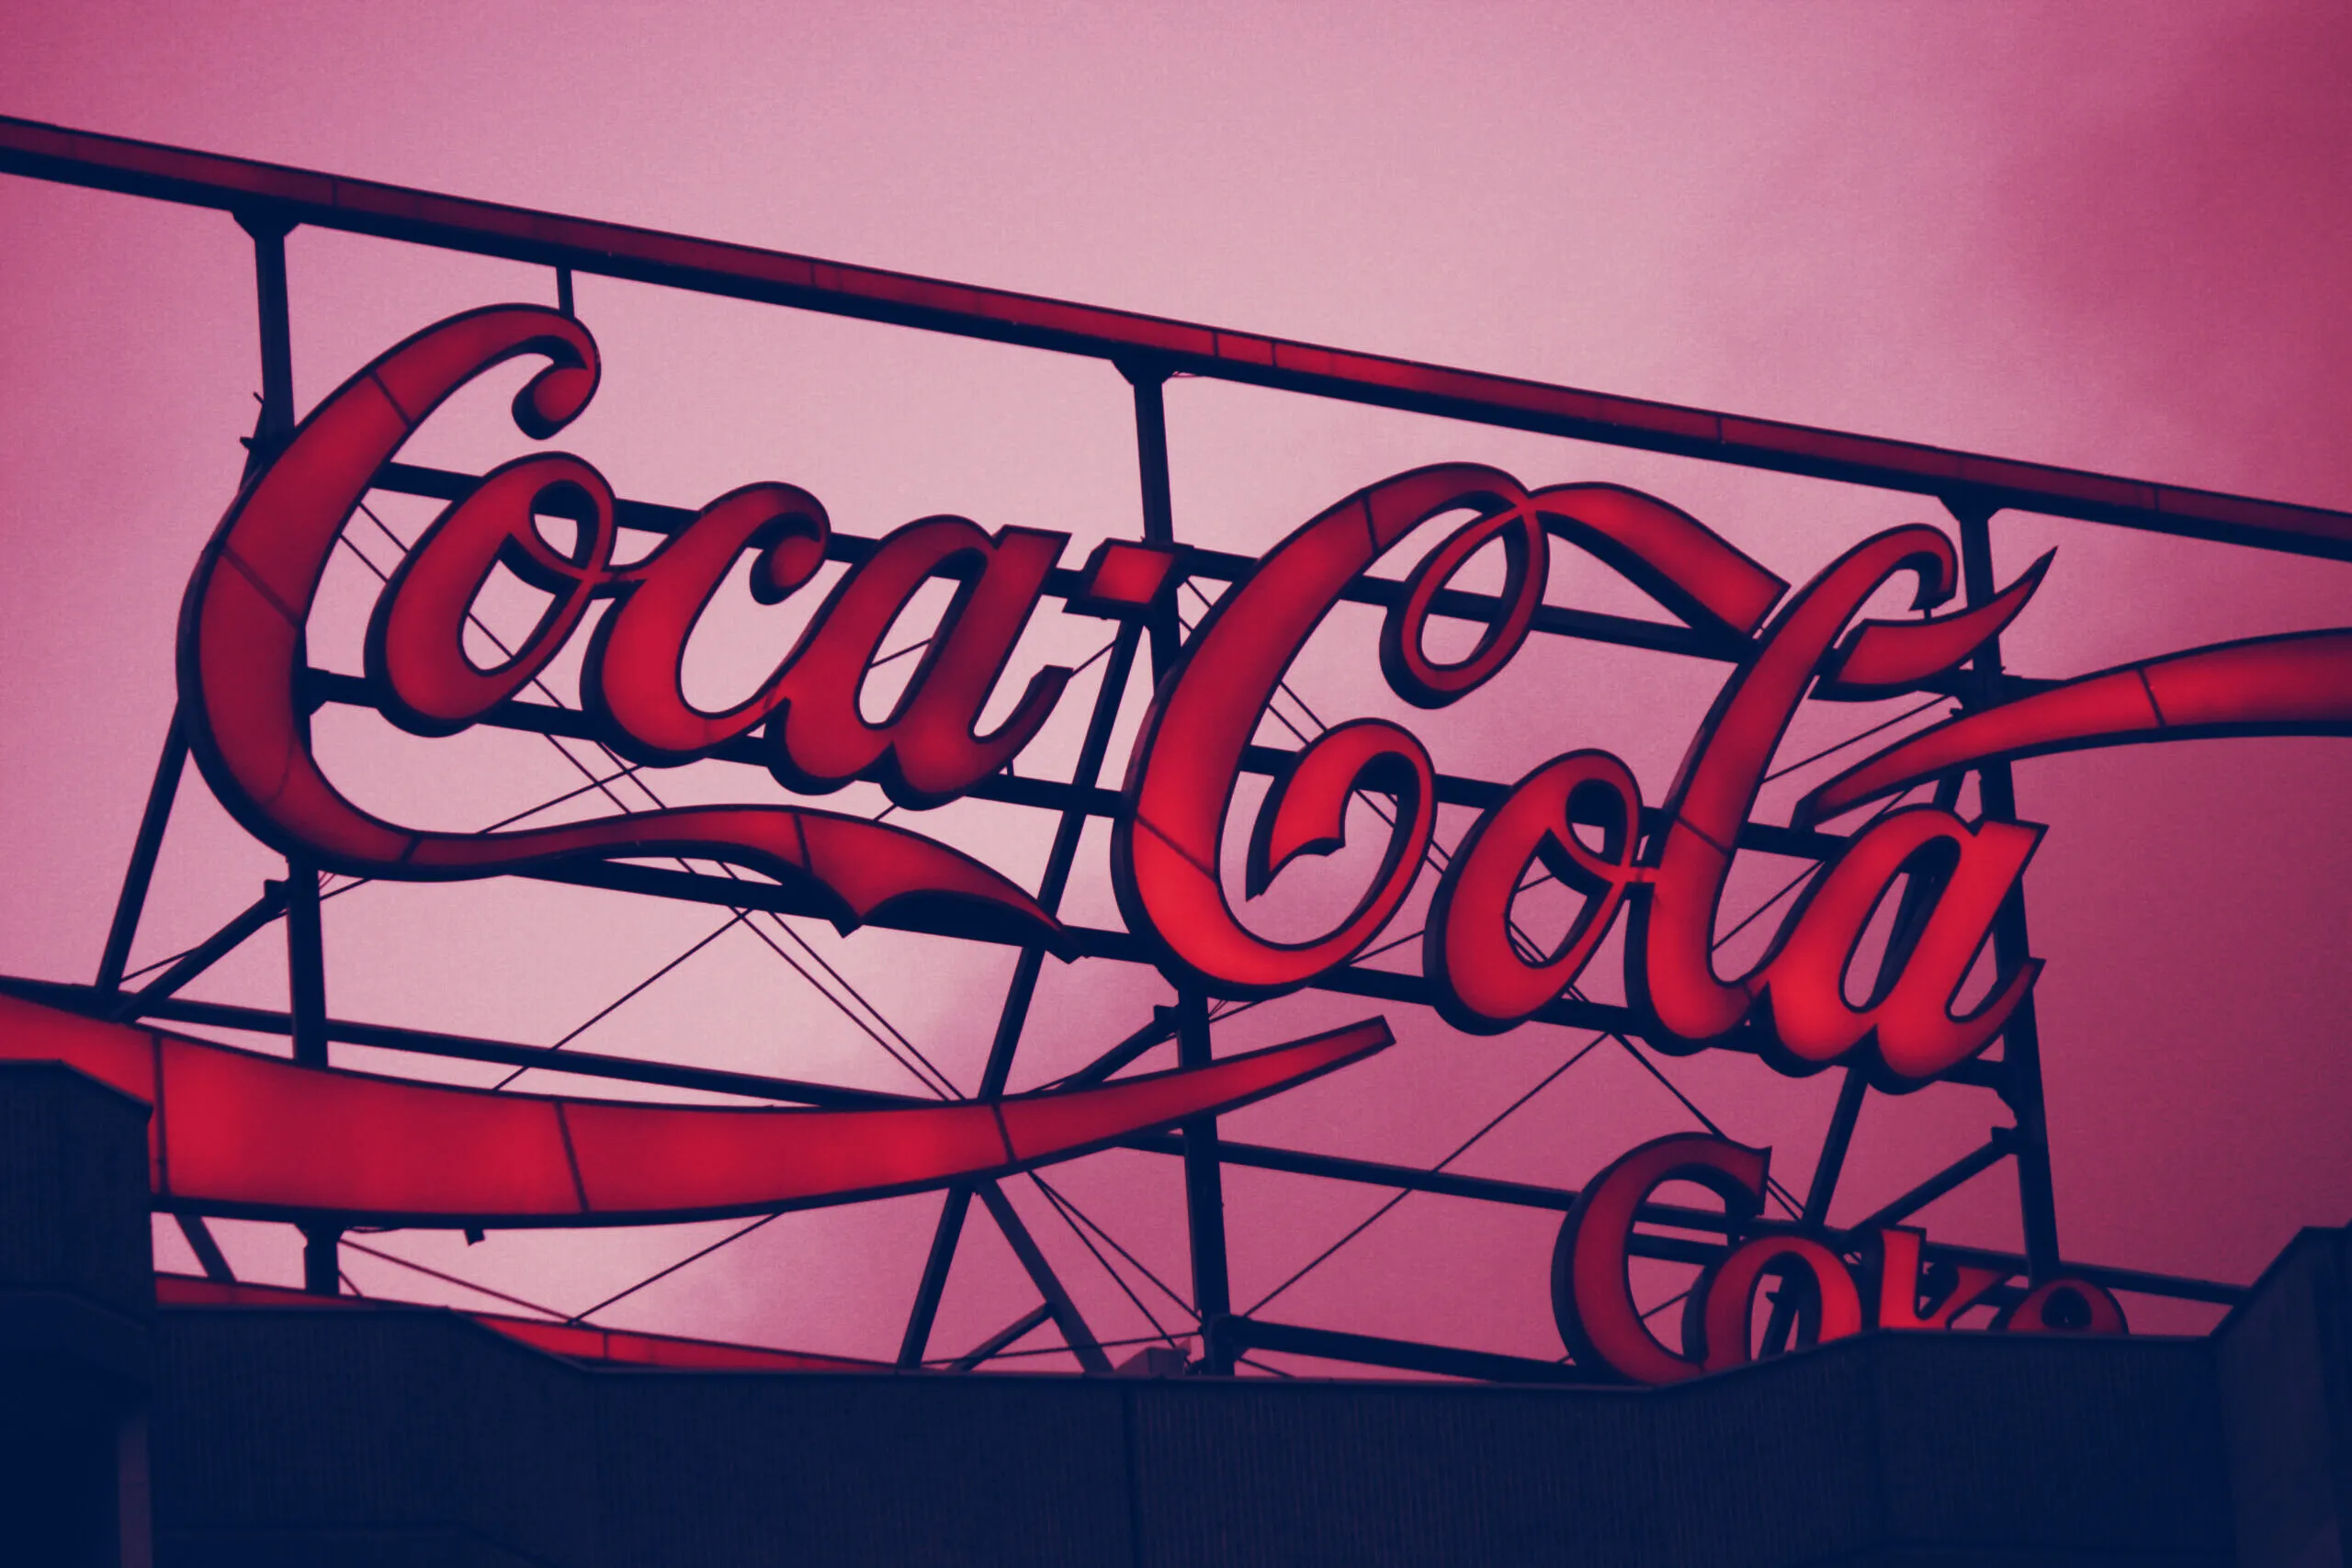 North America’s Coca-Cola bottling supply chain will soon have access to DeFi tools and tokens. Image: Shutterstock